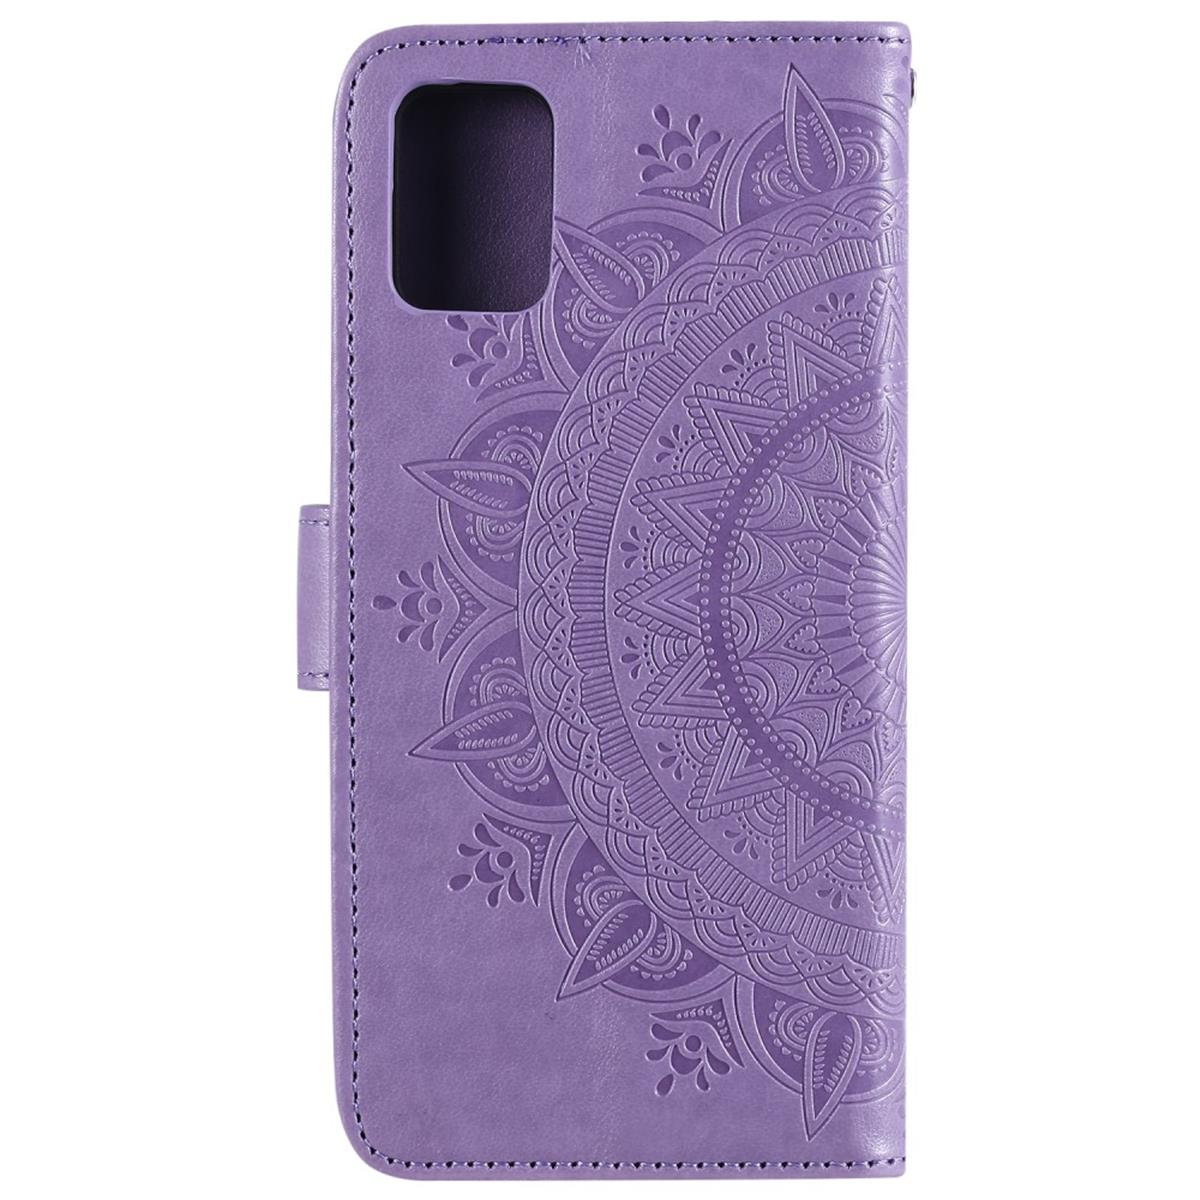 COVERKINGZ Klapphülle mit Mandala Note20, Lila Muster, Samsung, Galaxy Bookcover